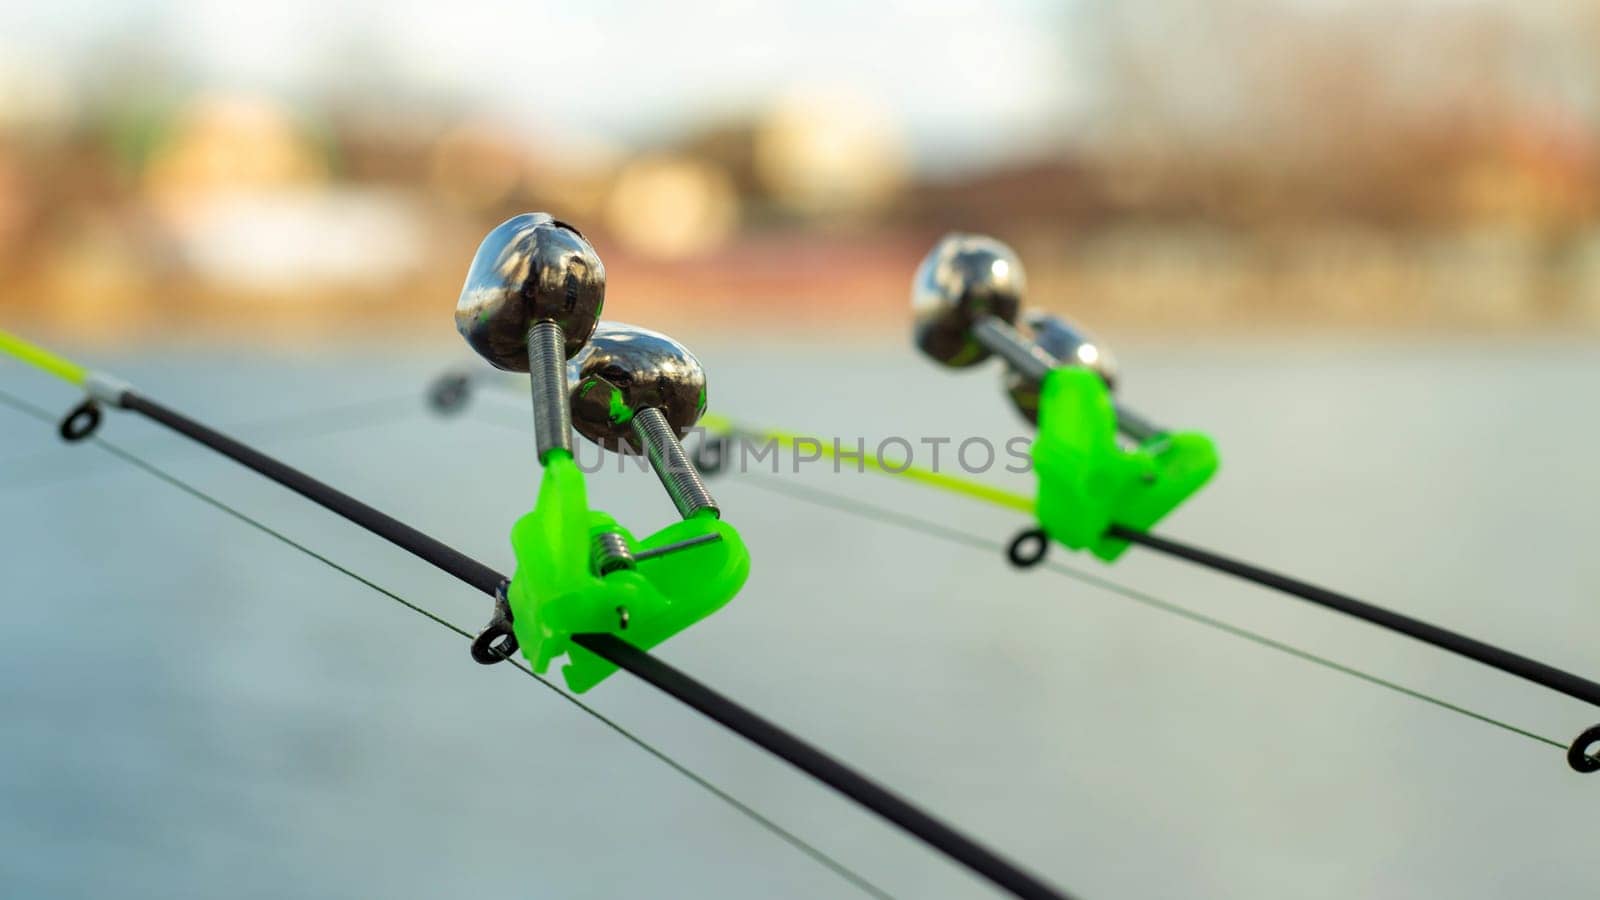 The bite alarm hangs on the tip of the fishing rod against the background of water. Fishing rod while fishing on the lake, river. Fishing tackle. Two rods with bite alarm